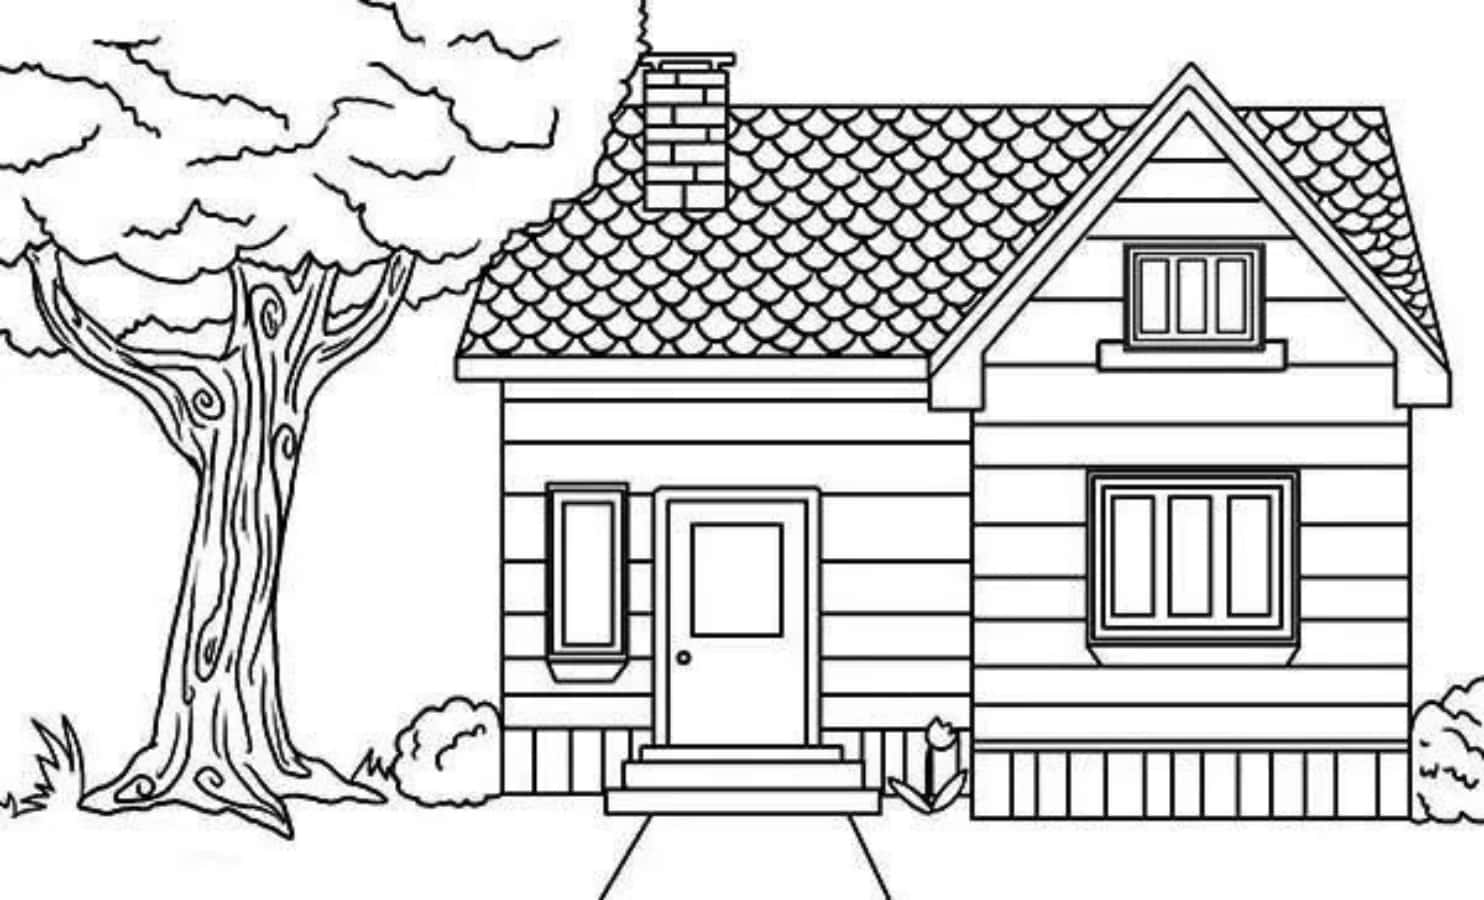 A House Coloring Page With A Tree And A House